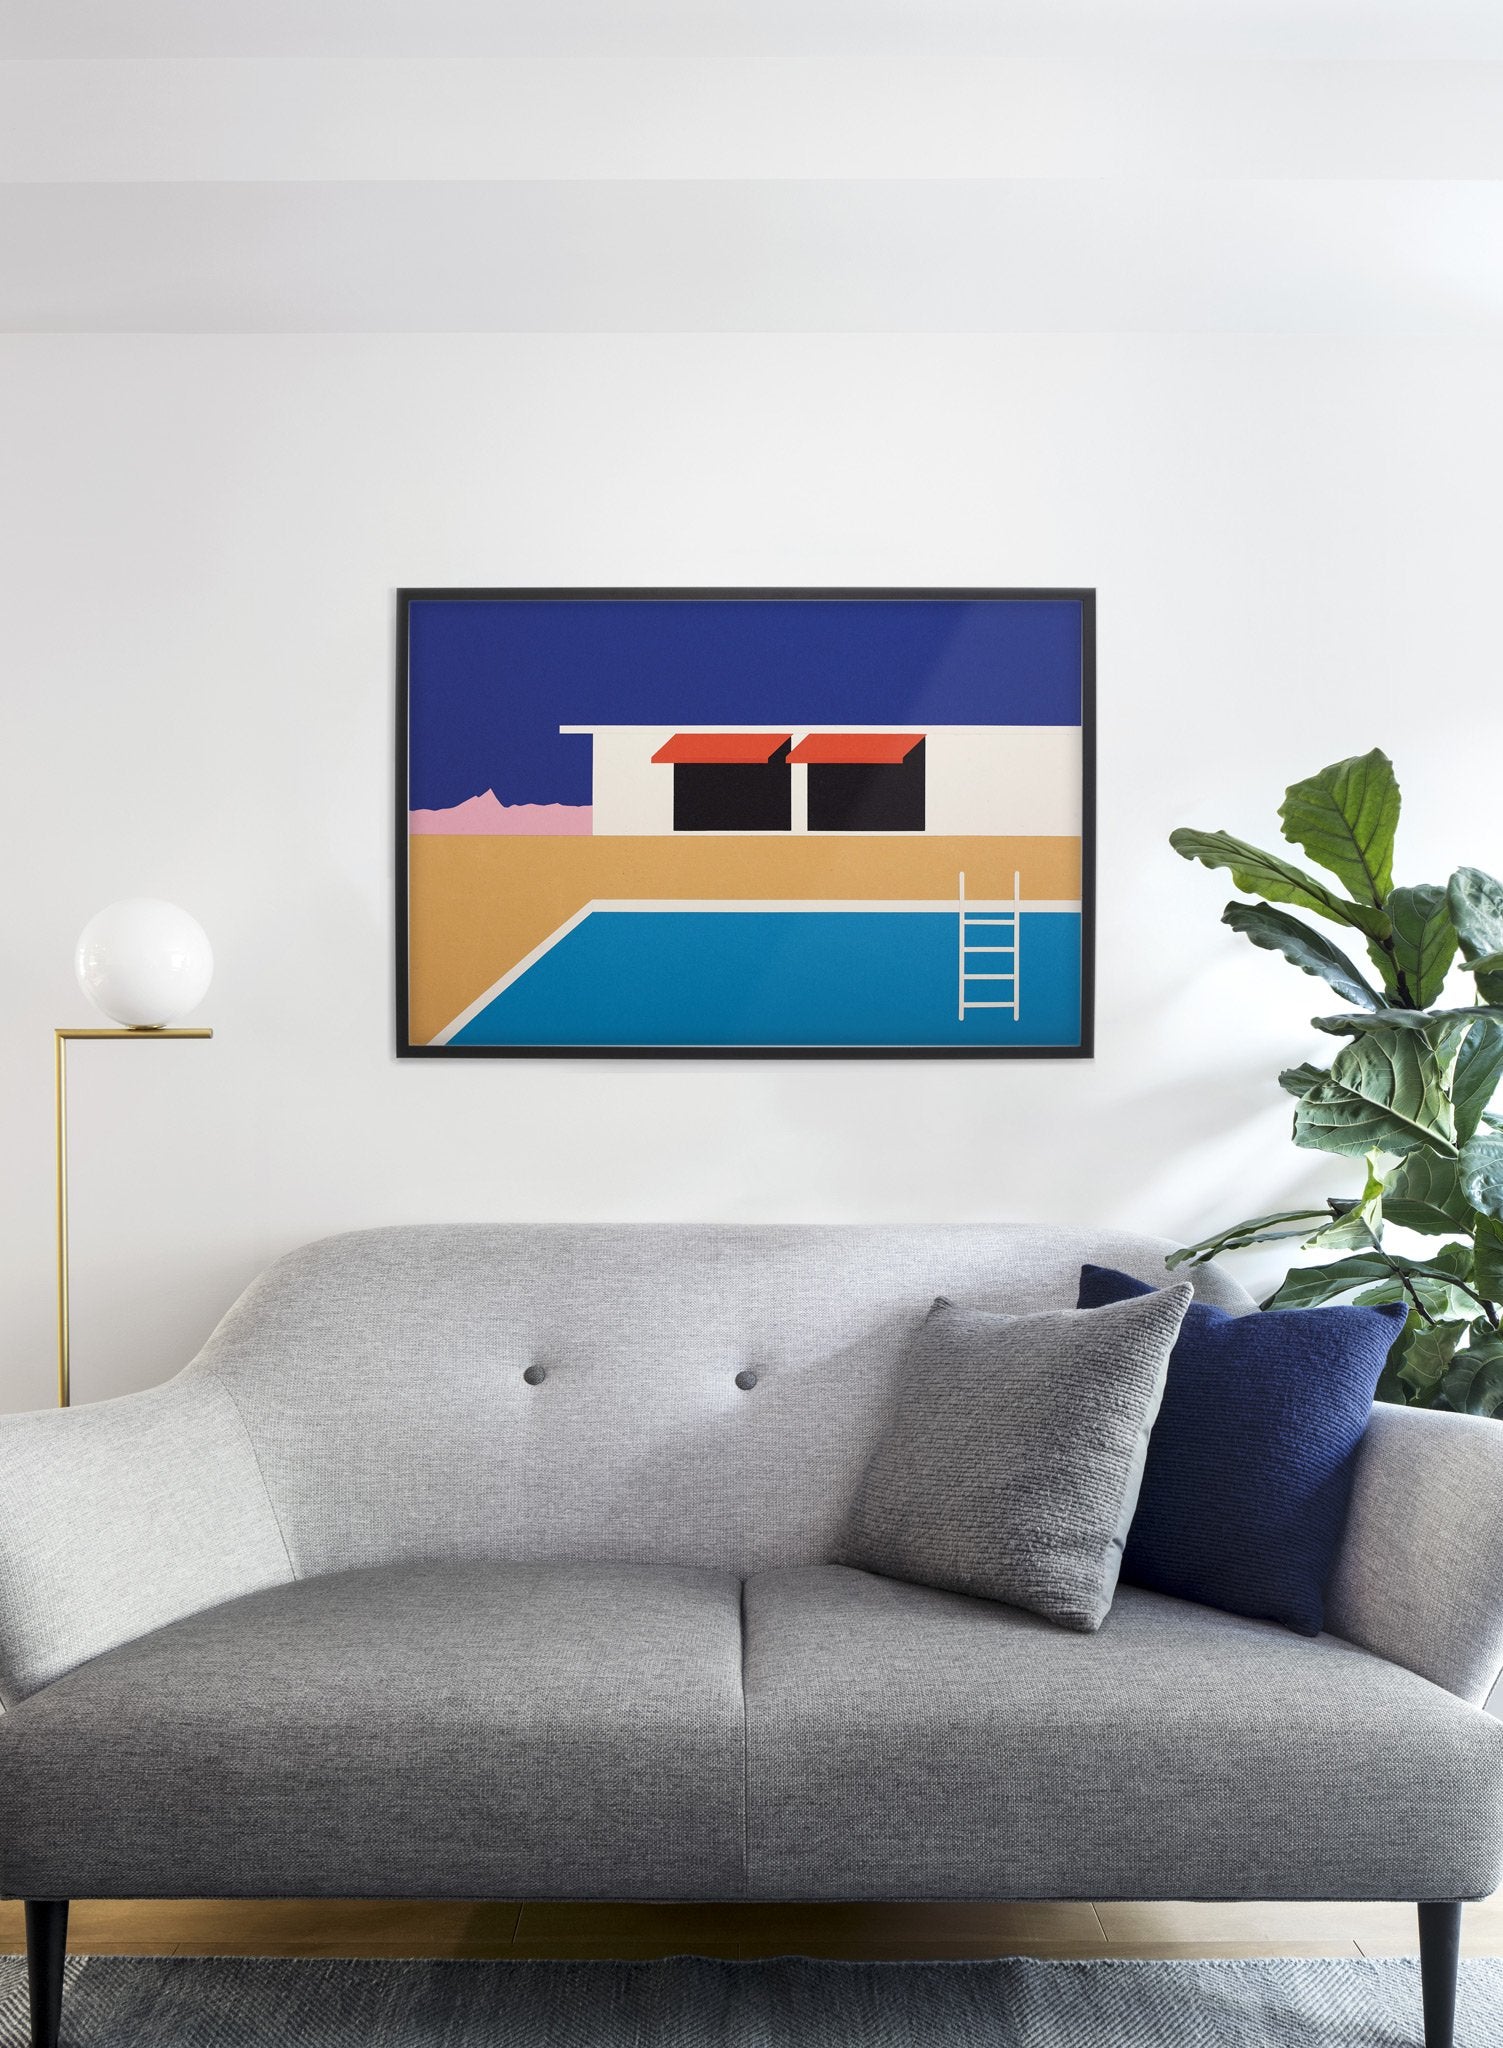 Modern minimalist poster by Opposite Wall with collage illustration of swimming pool - Living room